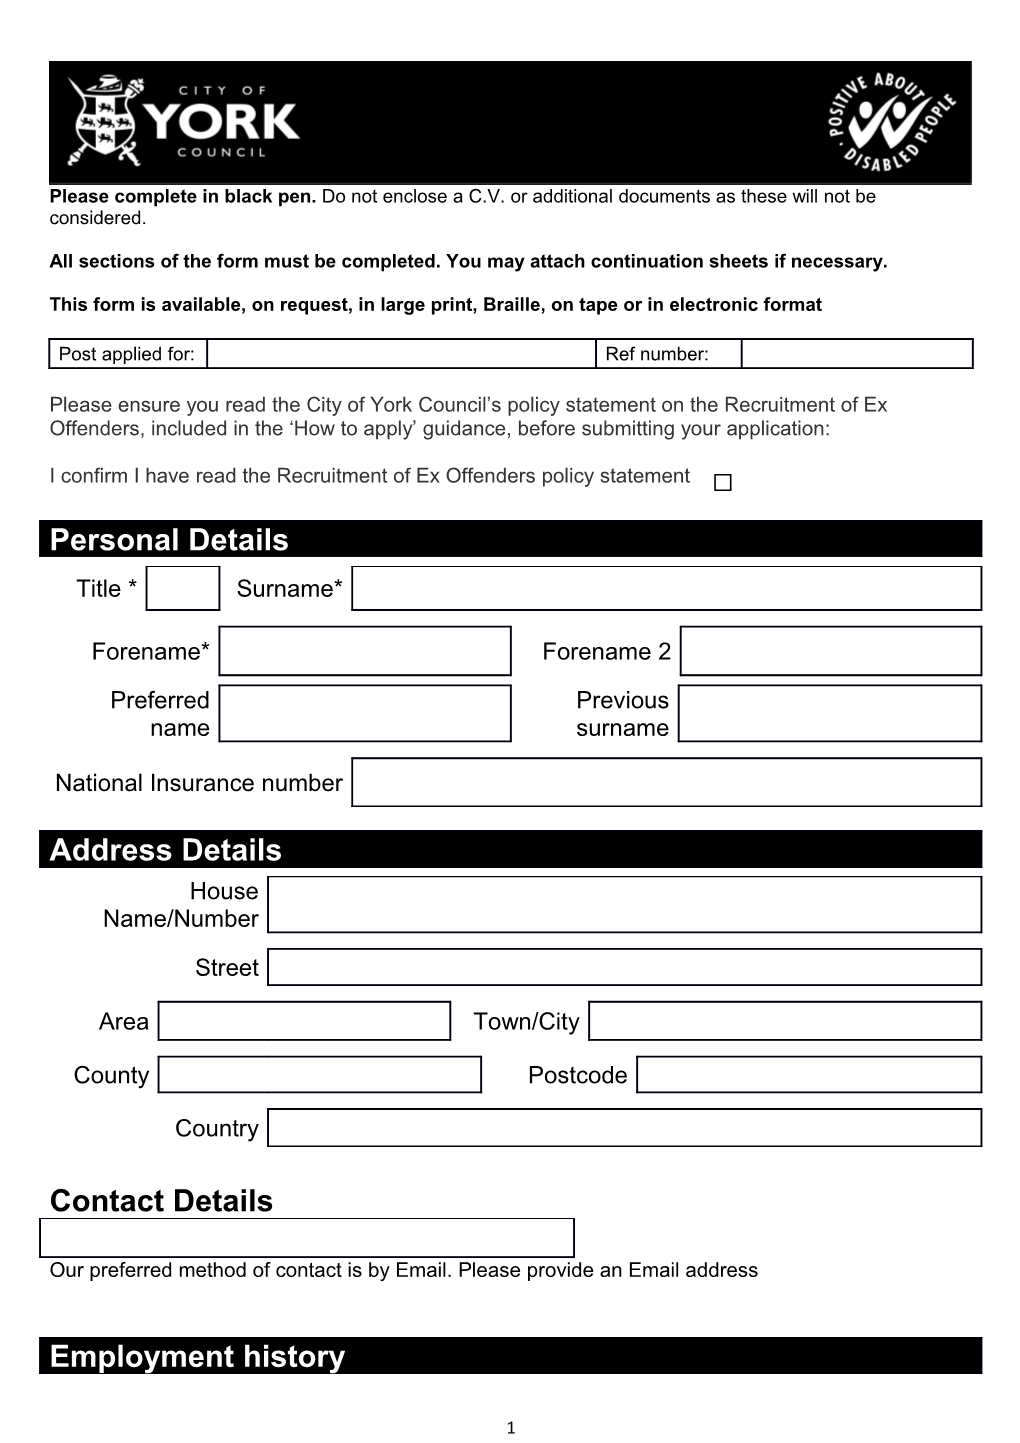 This Form Is Available, on Request, in Large Print, Braille, on Tape Or in Electronic Format